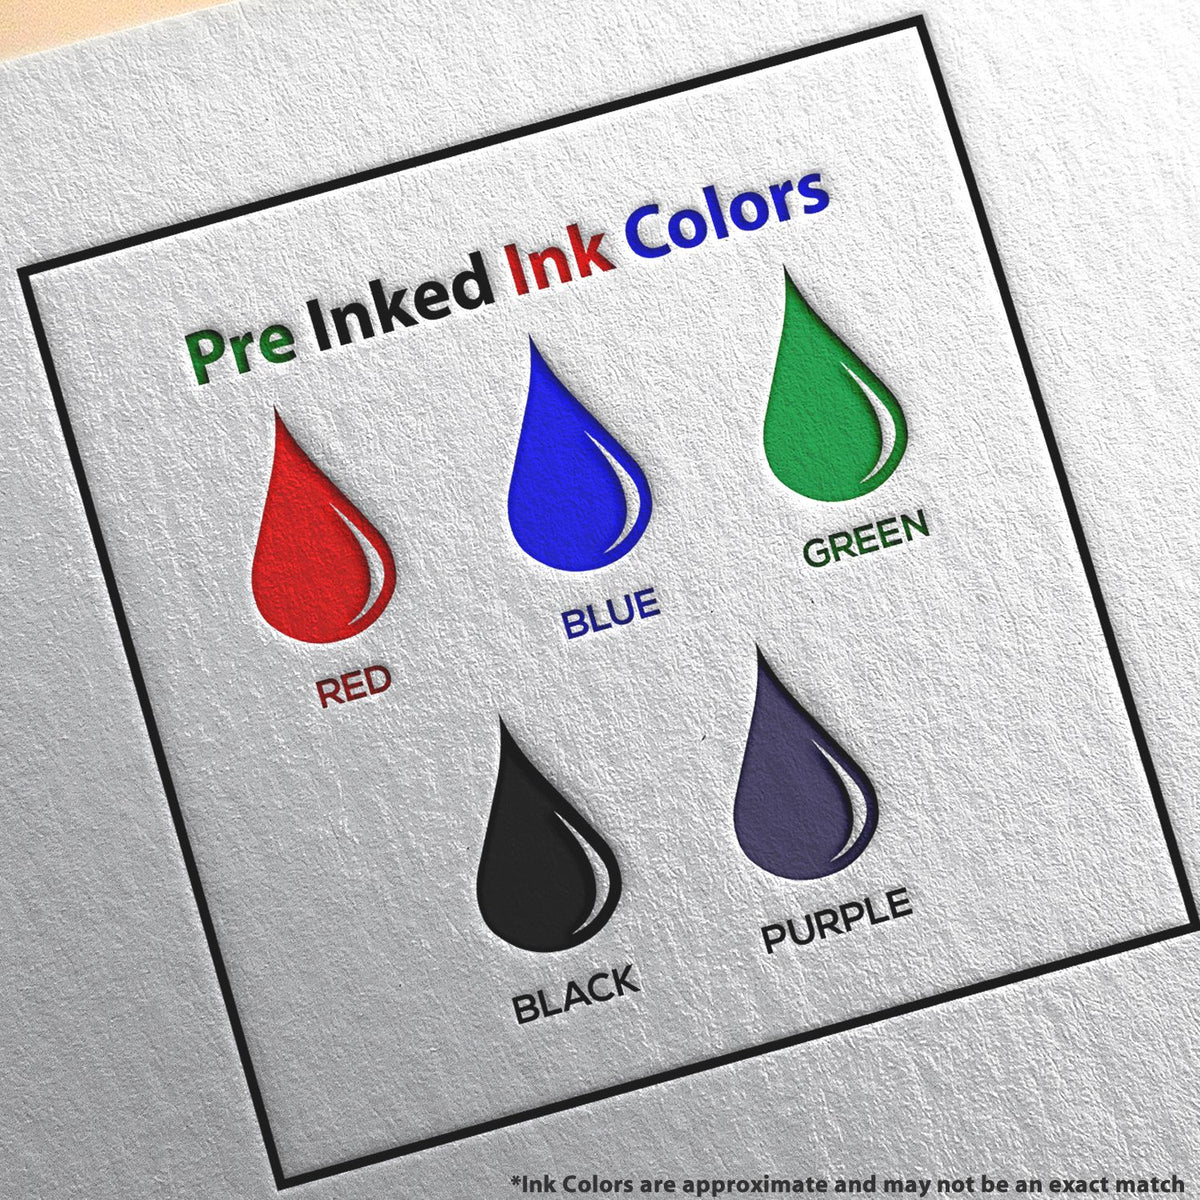 A picture showing the different ink colors or hues available for the Slim Pre-Inked New Jersey Landscape Architect Seal Stamp product.